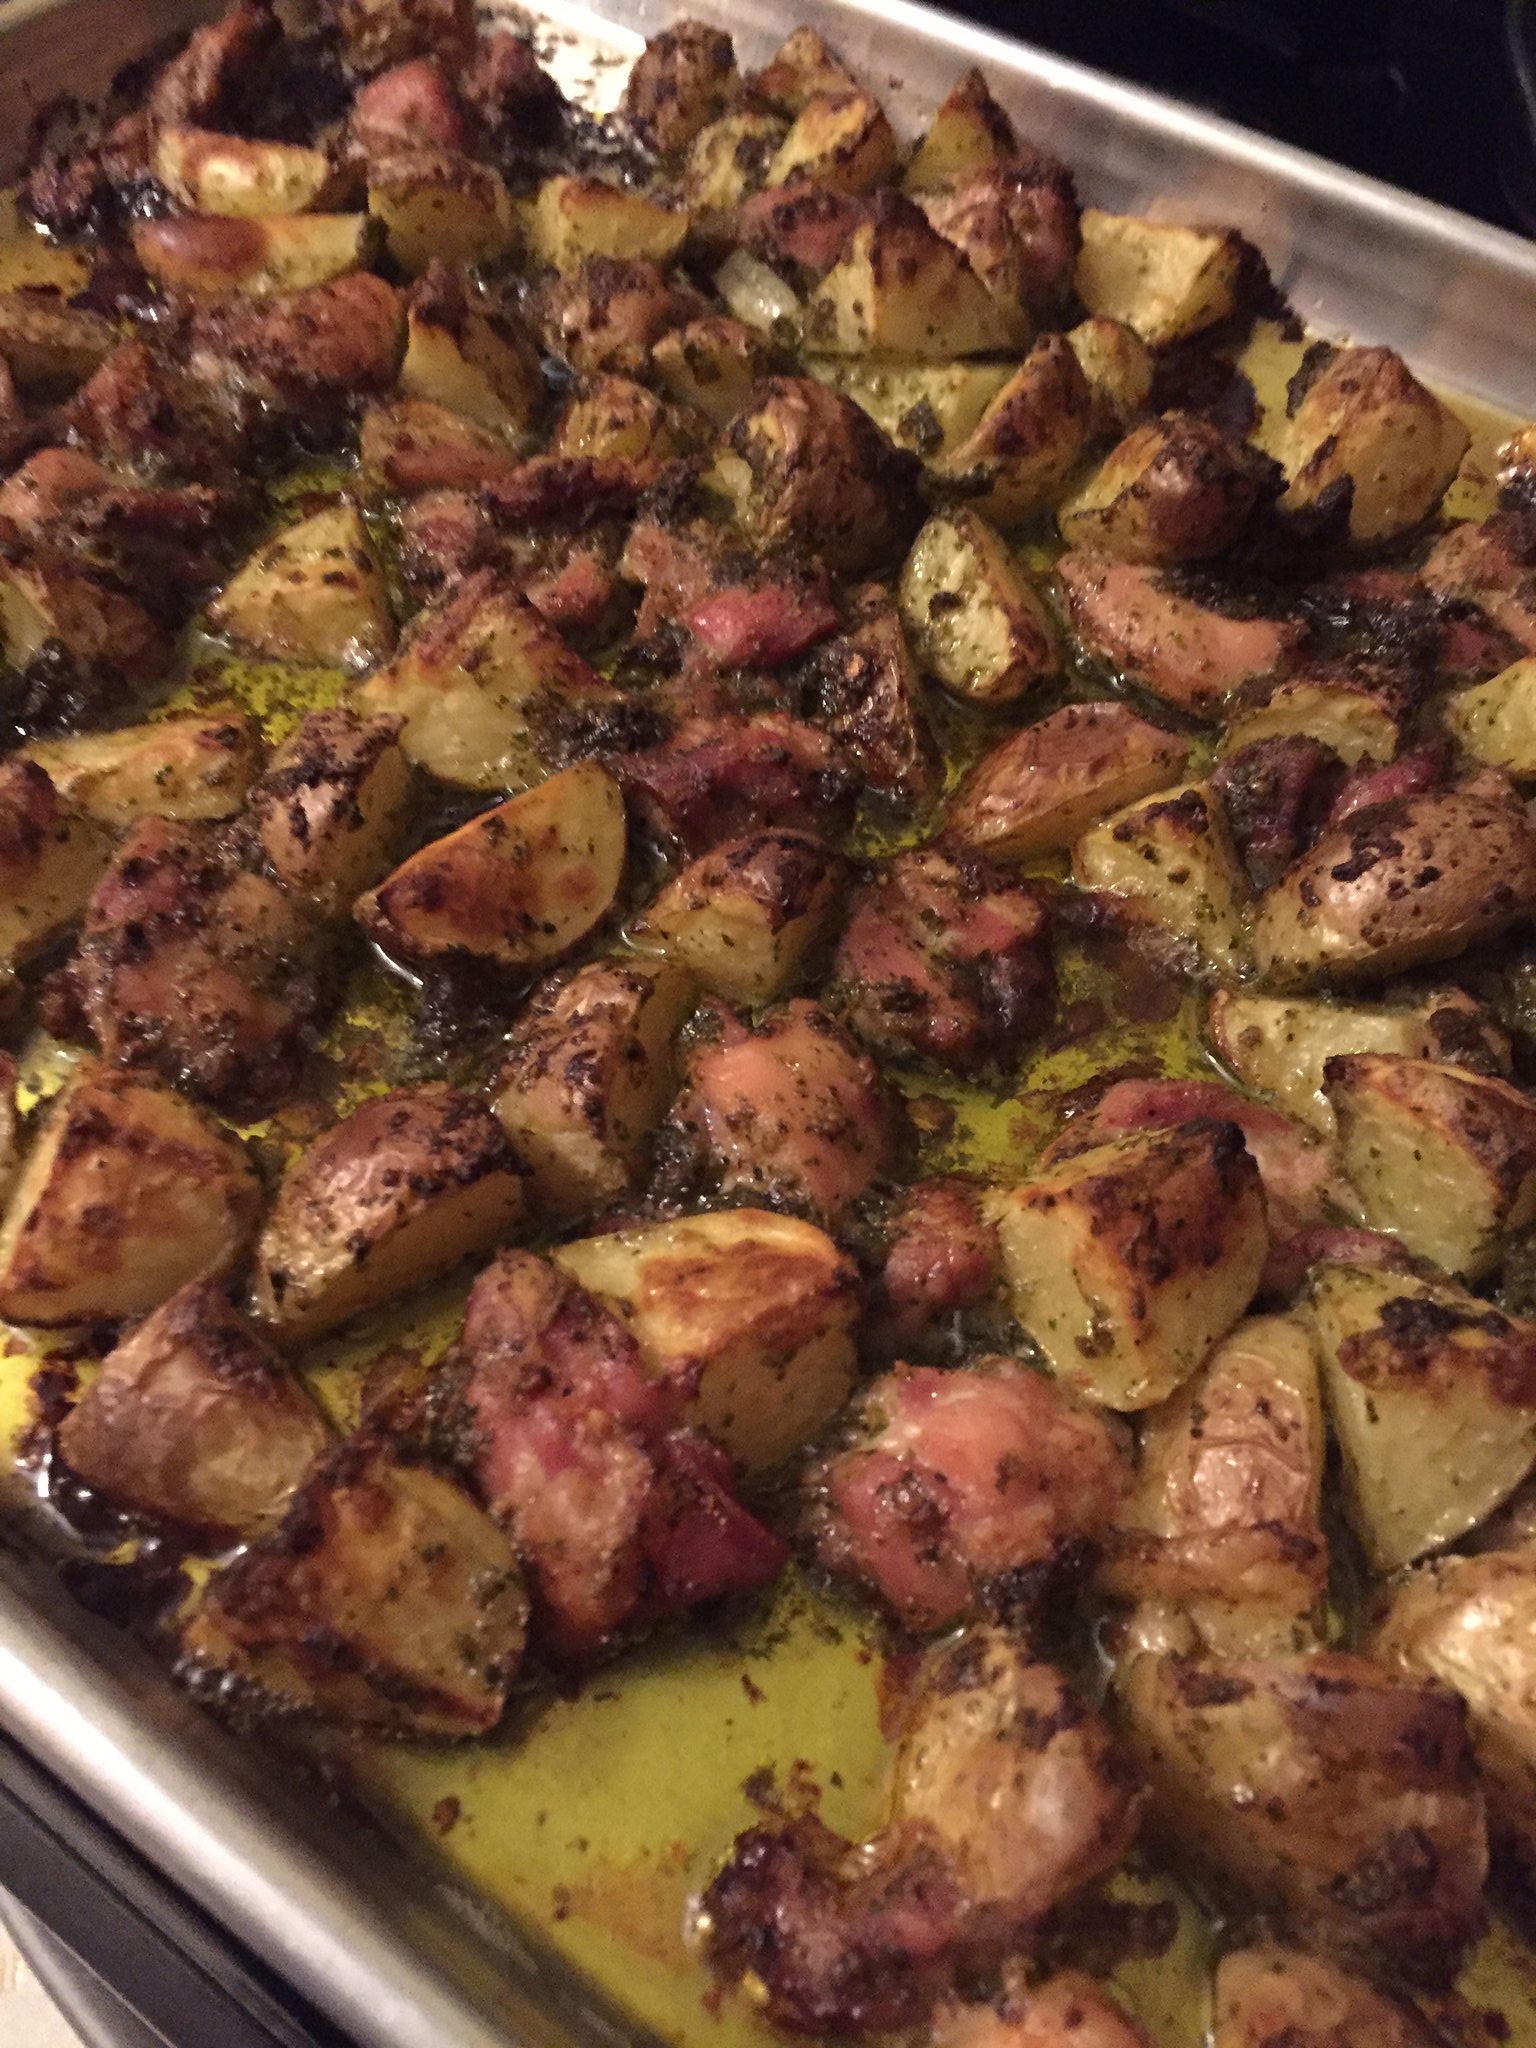 Sheetpan Supper: Pesto chicken thighs and potatoes